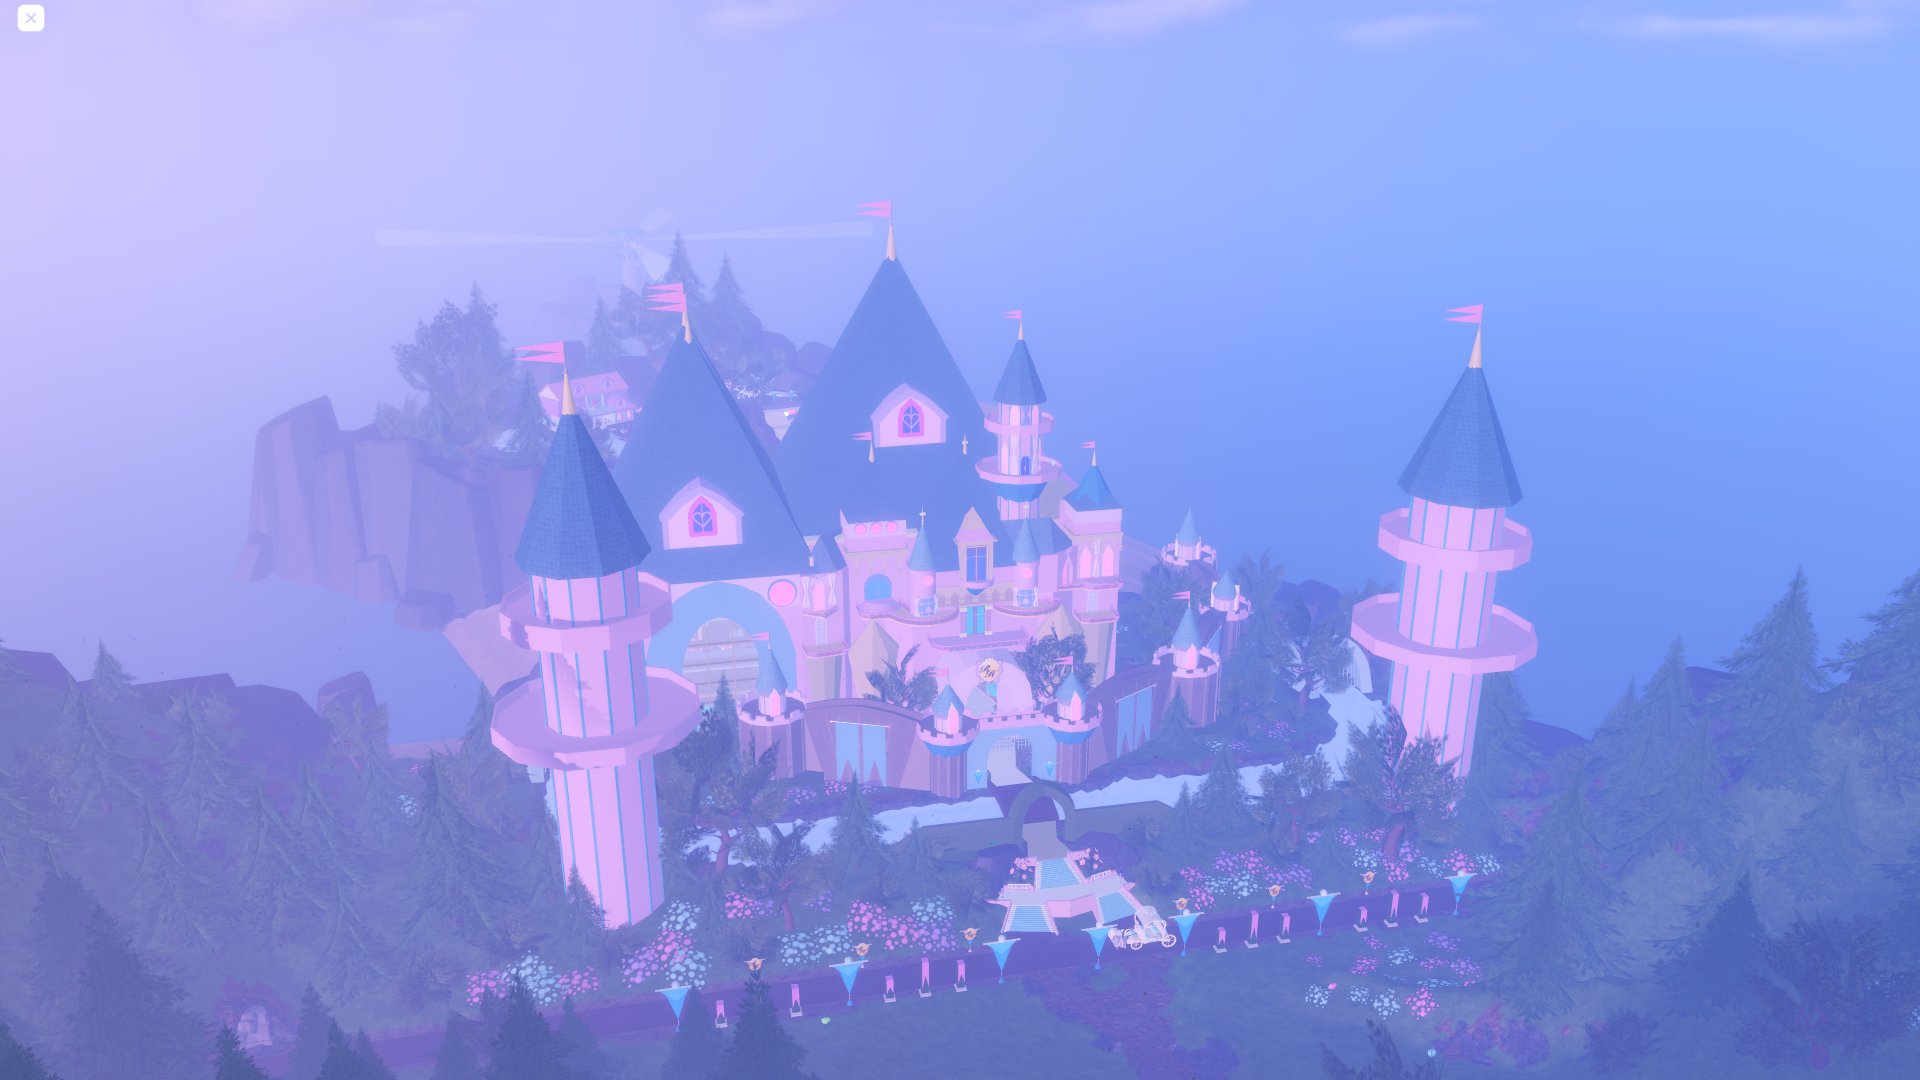 Royale High (New campus) by RoyaleMeow on DeviantArt